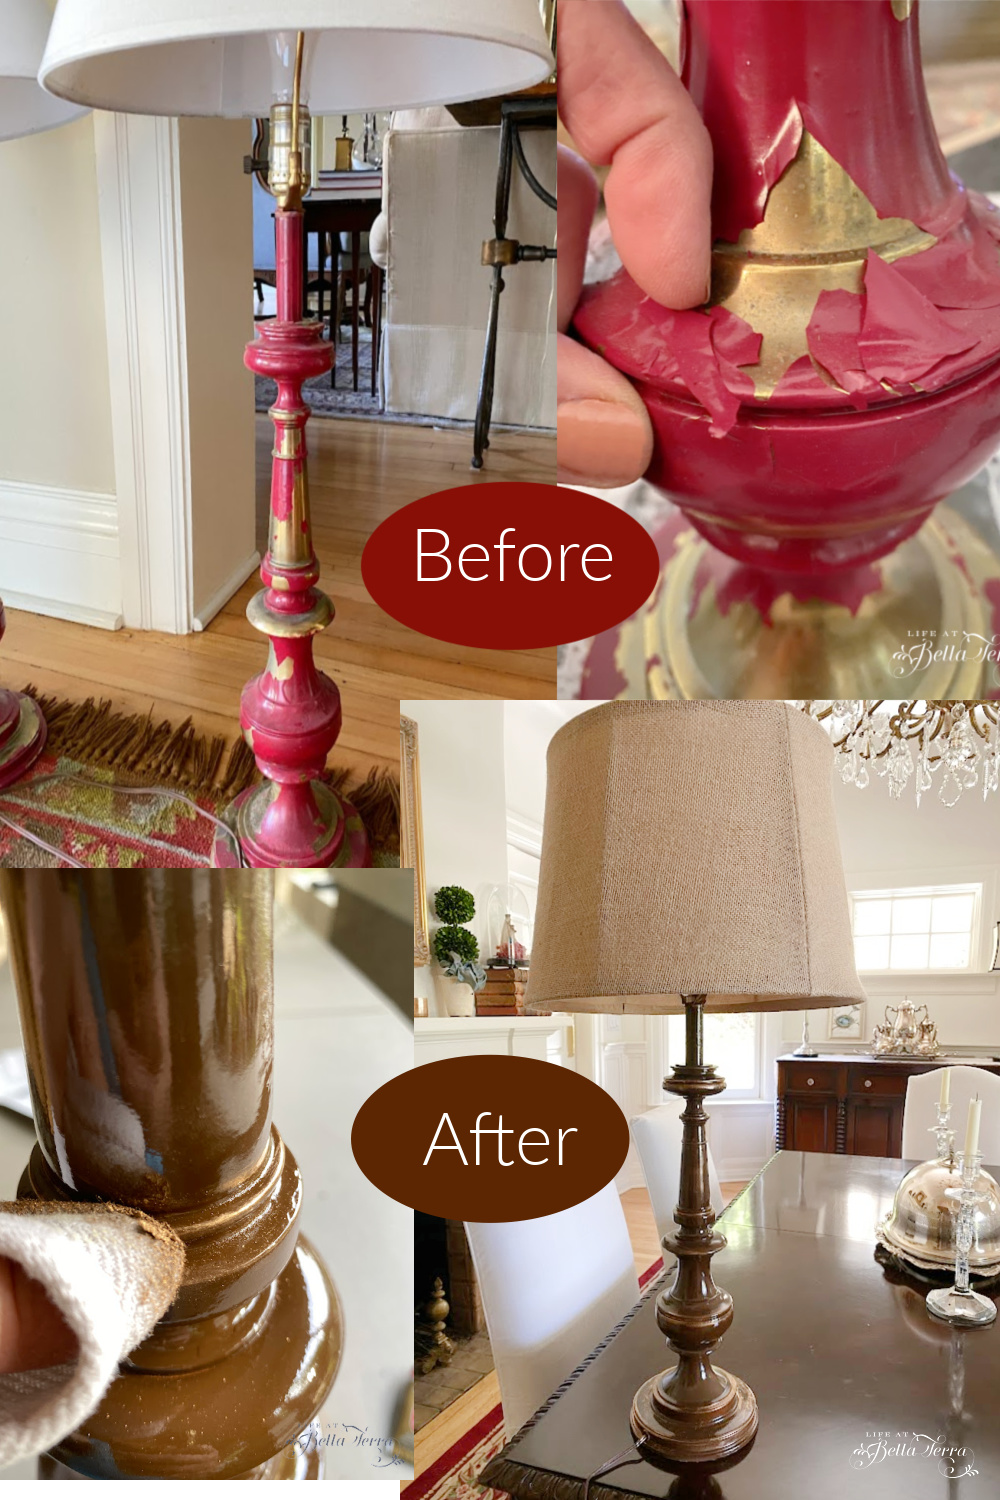 Lamp Makeover: How to Spray Paint a Brass Lamp